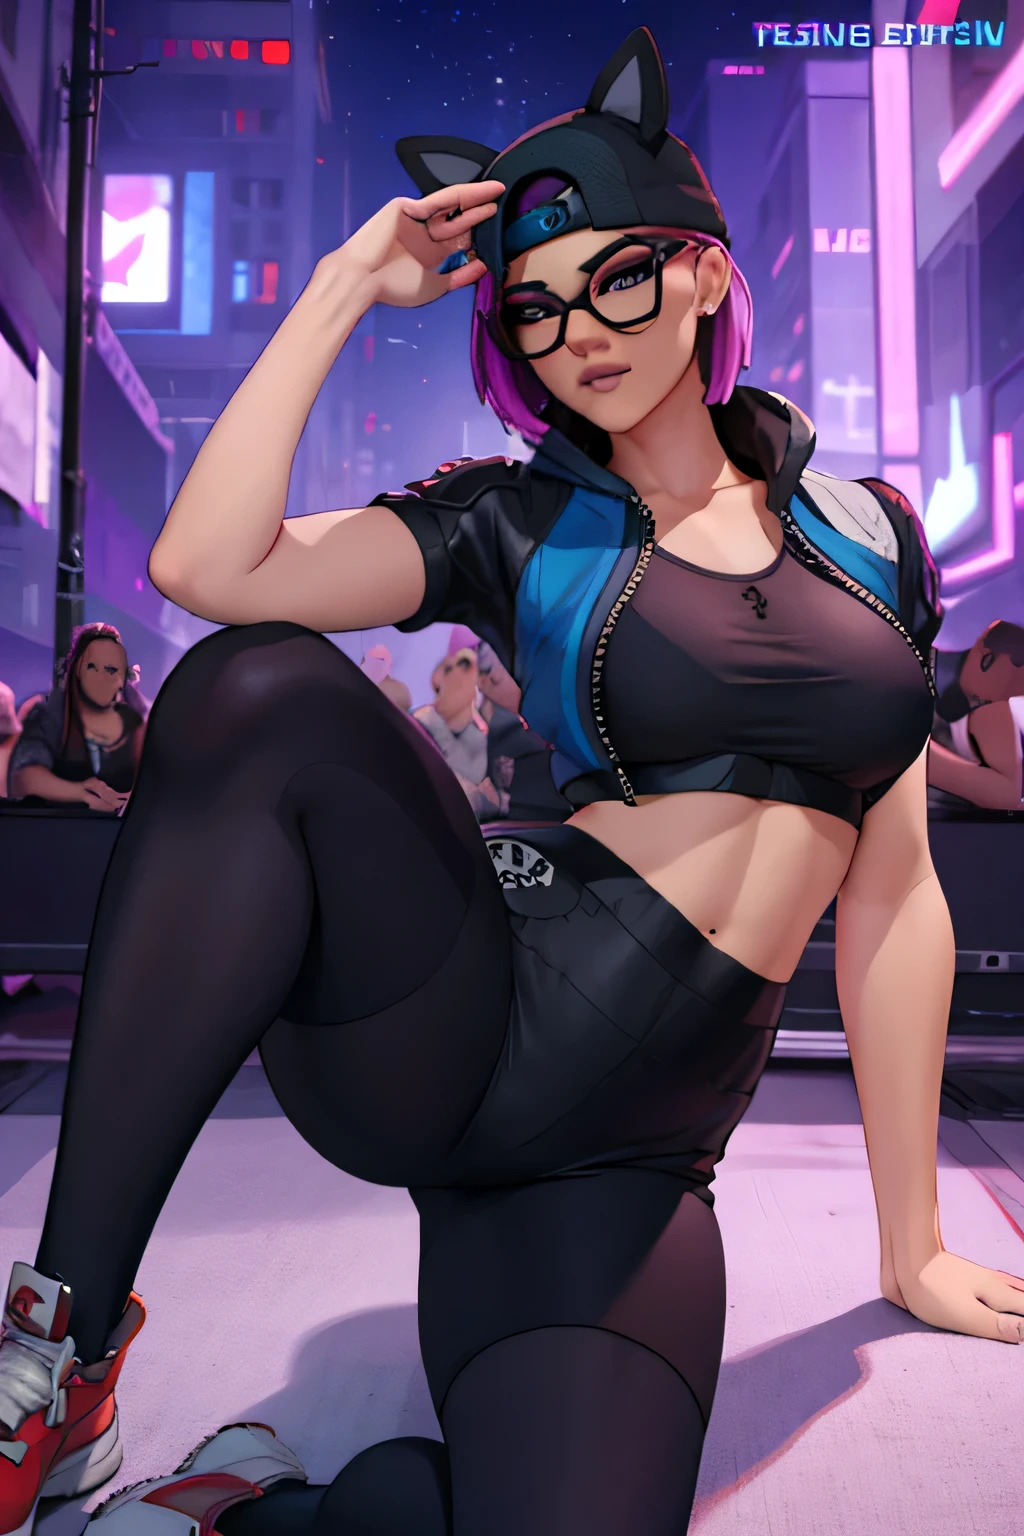 Cyberpunk Linen Suit, cap, black shorts with navy blue leggings, navy blue jacket ,extremely detailed, Detailed face, glasses ,beautiful face, fine eyes, looking at the viewer, feminine pose, evening 